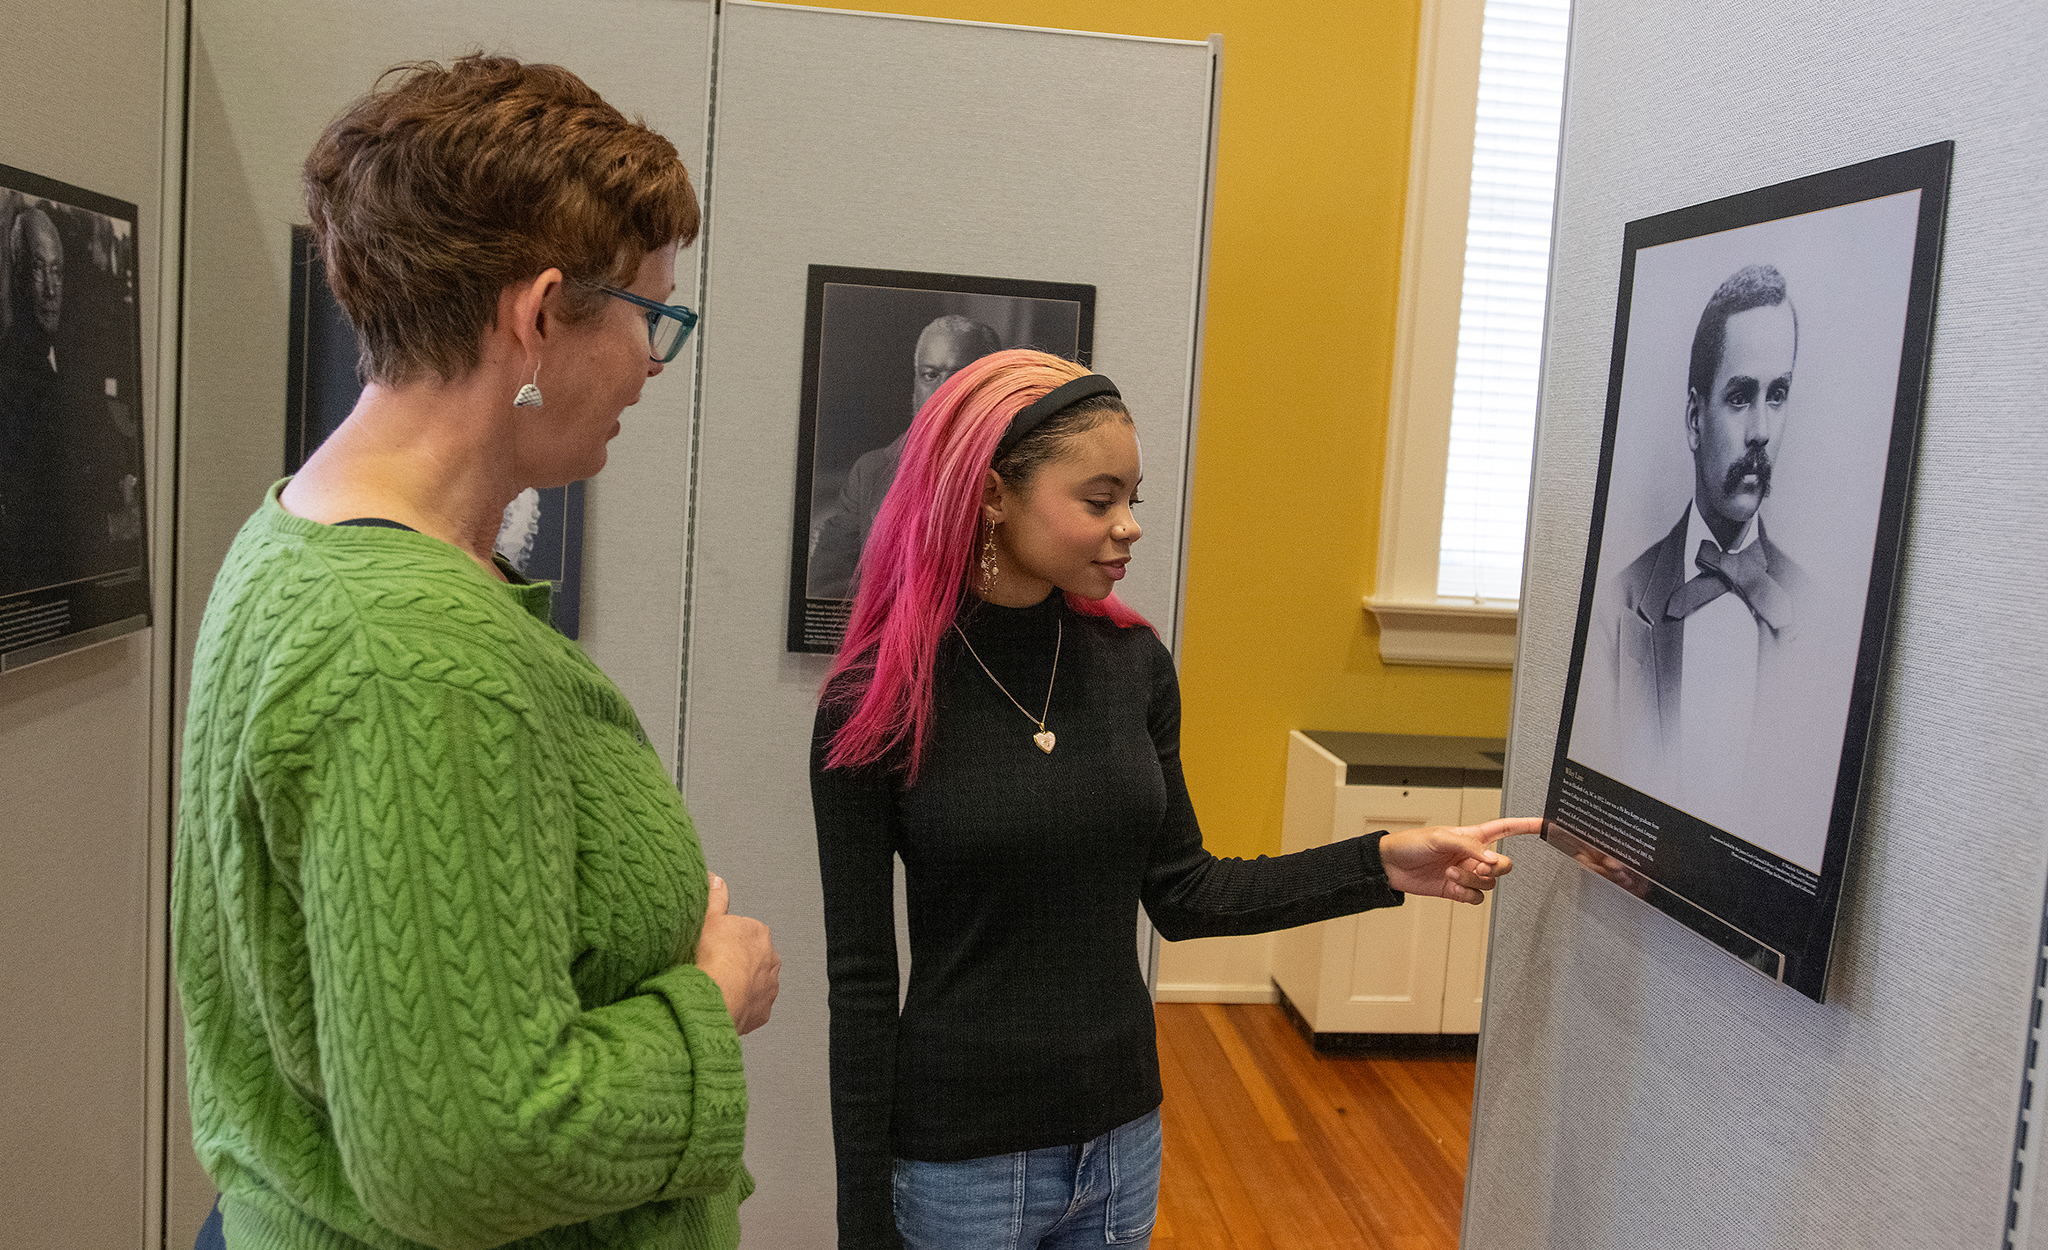 Molly Pasco-Pranger (left), chair and professor of classics, discusses the ’14 Black Classicists’ traveling exhibition on display at Bryant Hall’s Farrington Gallery with Kristen Randle, a sophomore classics major who helped install the exhibit. Photo by Thomas Graning/Ole Miss Digital Imaging Services